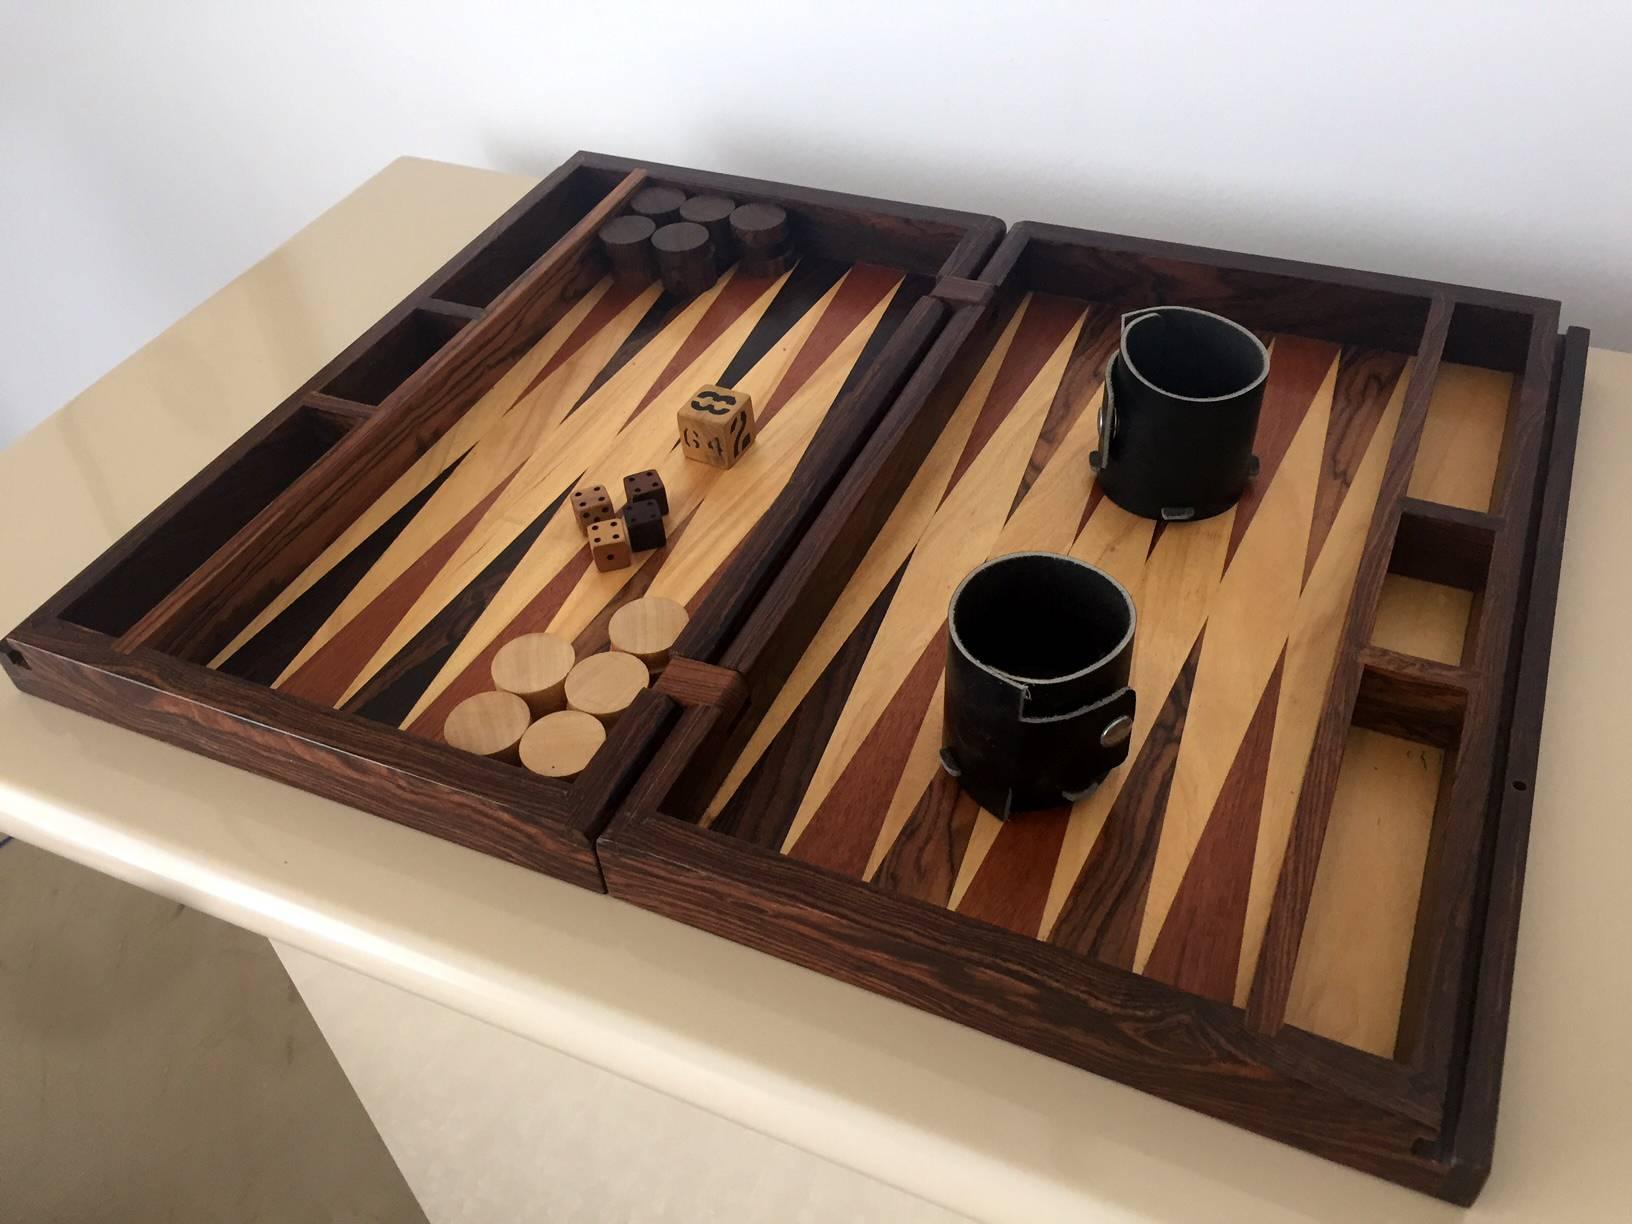 An amazing backgammon game set designed by Don Shoemaker and handcrafted by Señal S.A. Industrial designs in Mexico. The set was designed as a traveling suitcase with lockable handle. It is a complete set with discs, dices and even leather cups.